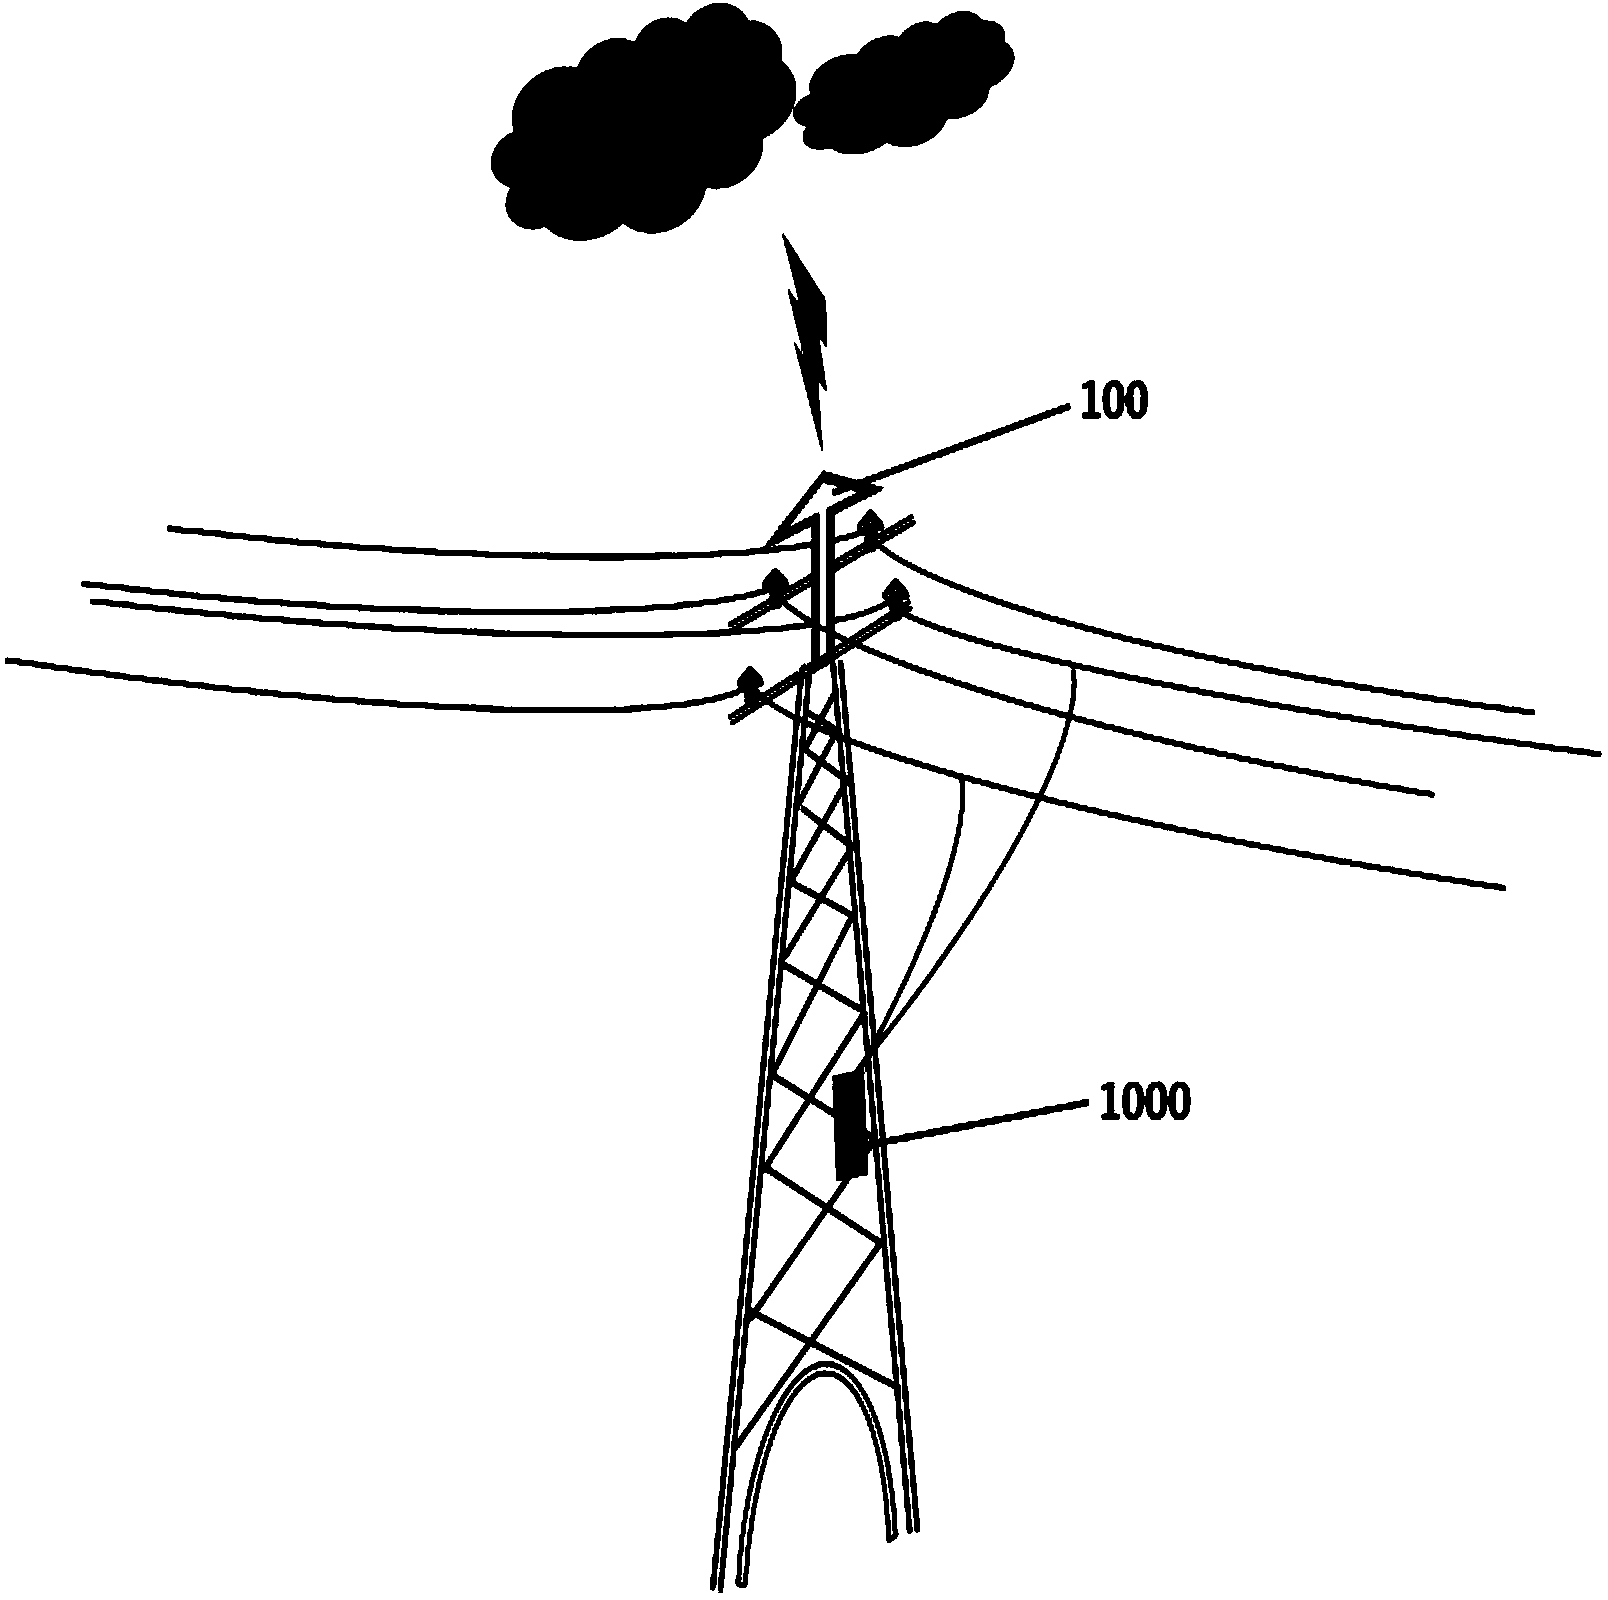 Method and system for achieving power supply through thunder and lightning